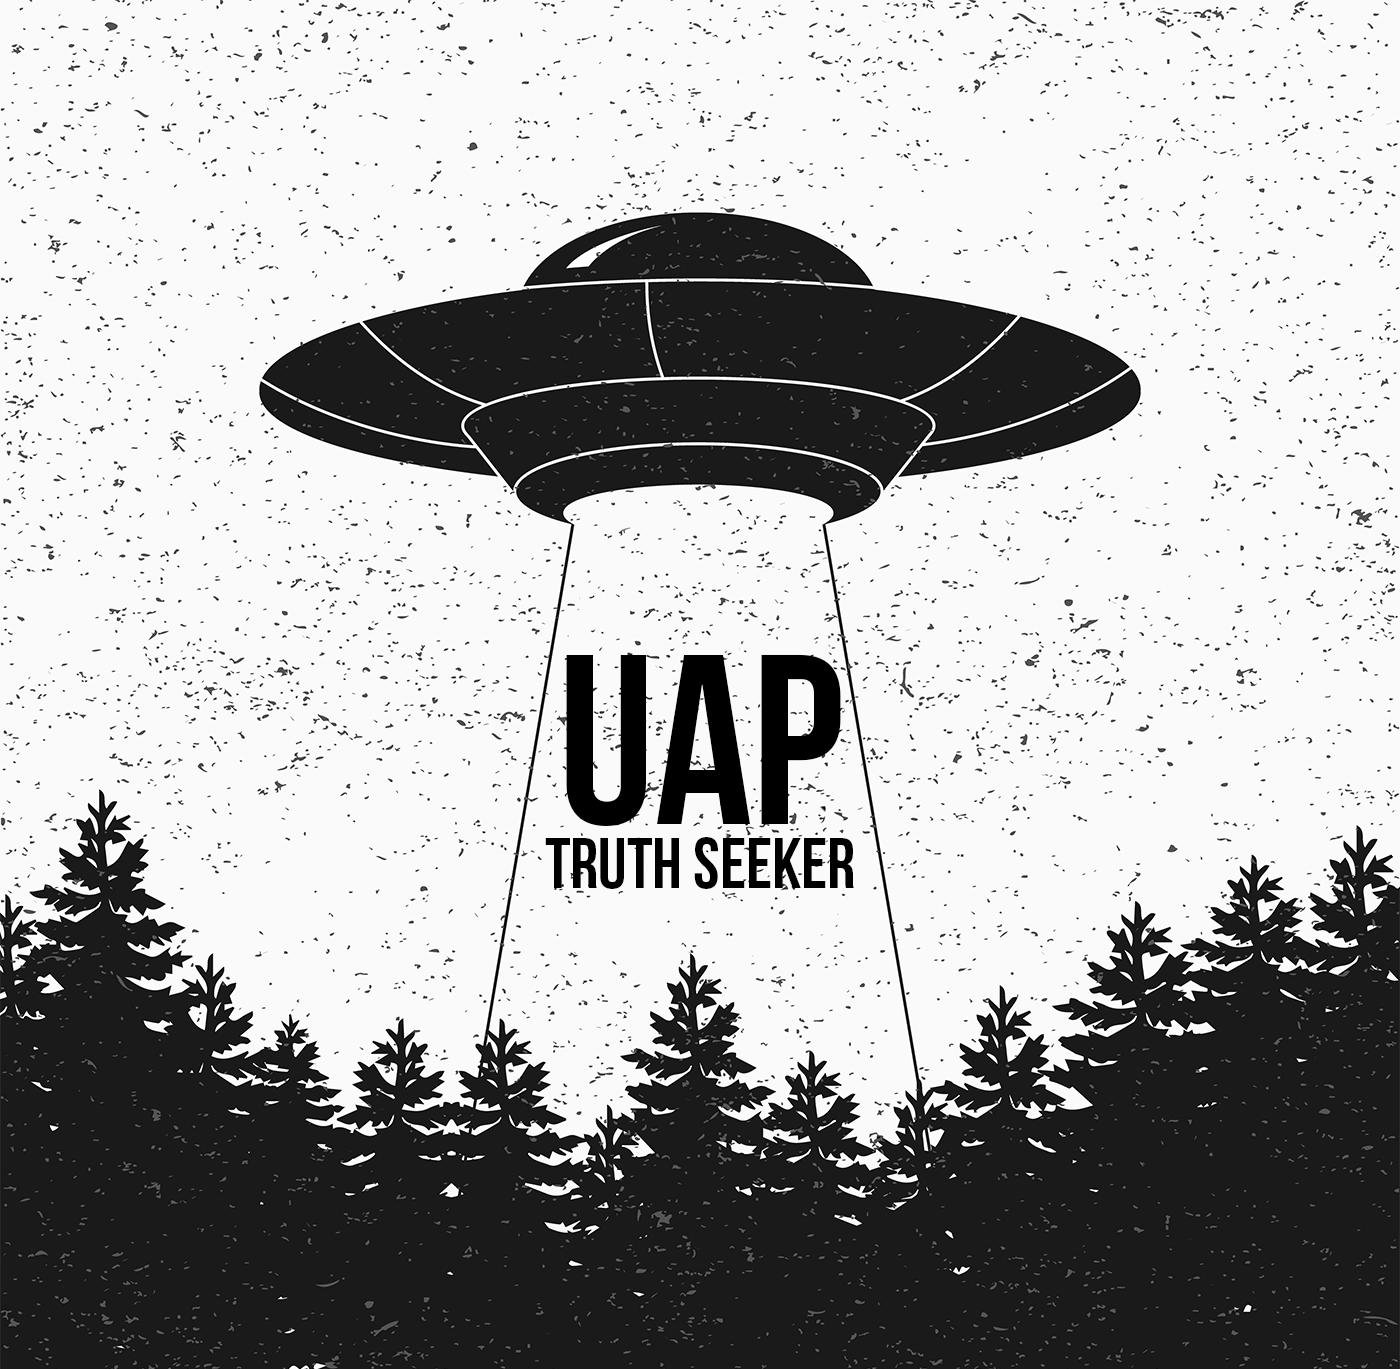 All things UFO/UAP related with an open minded approach